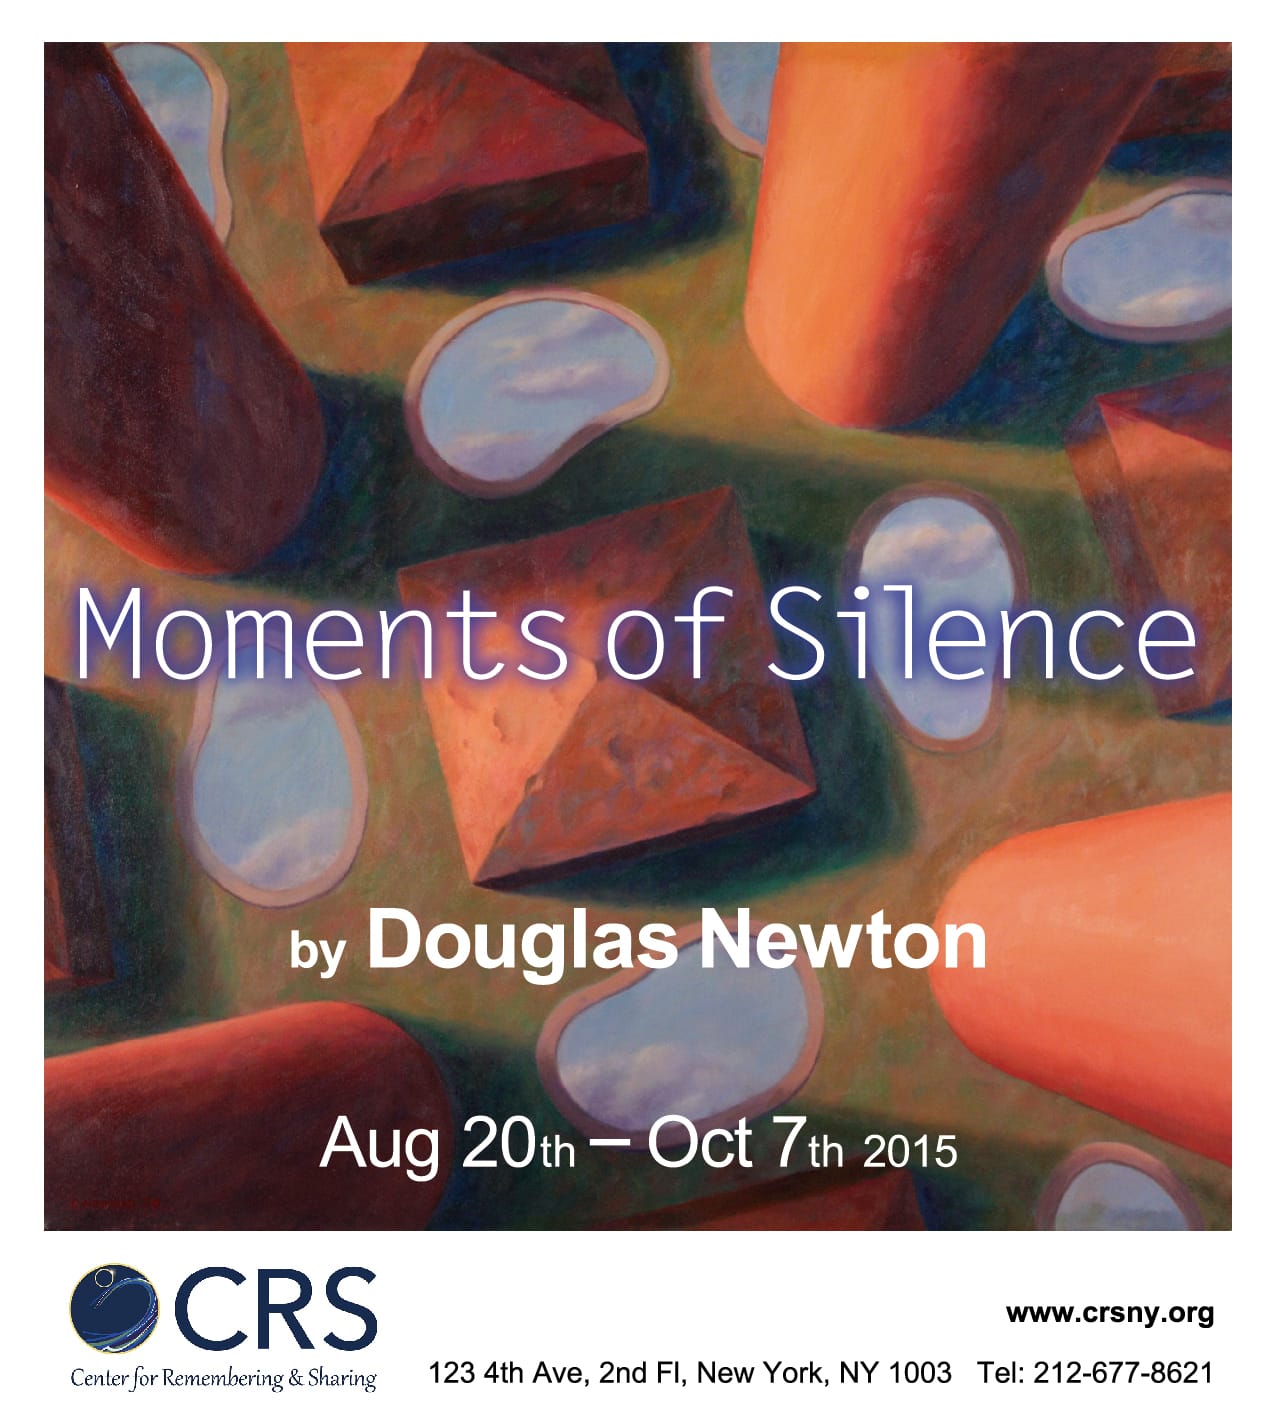 Exhibition: Moments of Silence by Douglas Newton